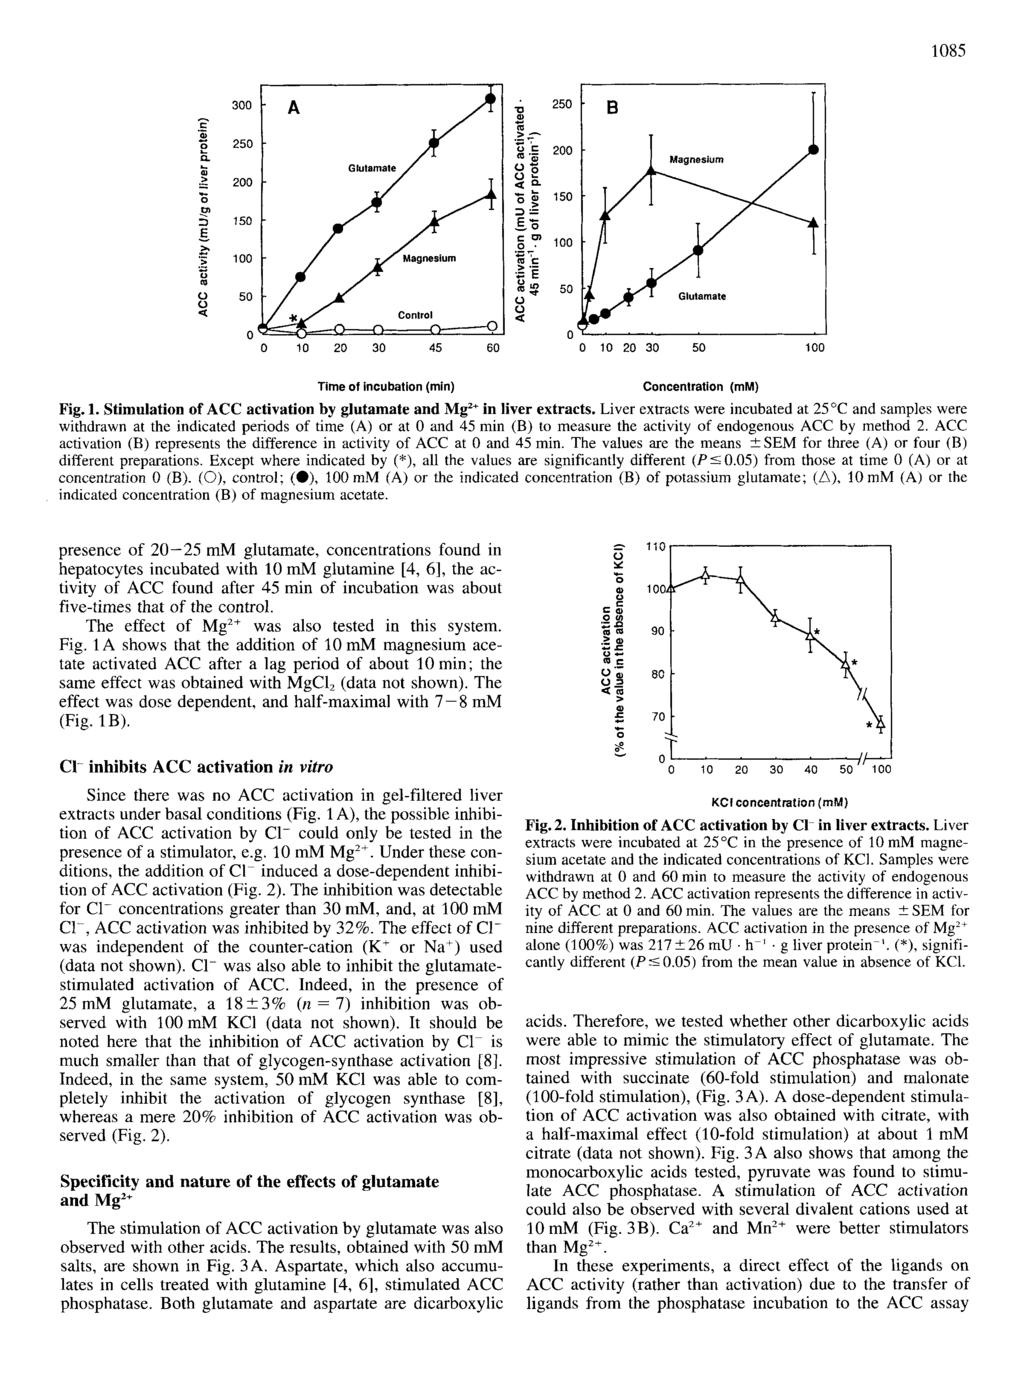 B I 1085 200 1 50 100 50 0 0 10 20 30 45 60 0 10 20 30 50 100 Time of inubation (rnin) Conentration (mm) Fig. 1. Stimulation of ACC ativation by glutamate and Mg in liver extrats.